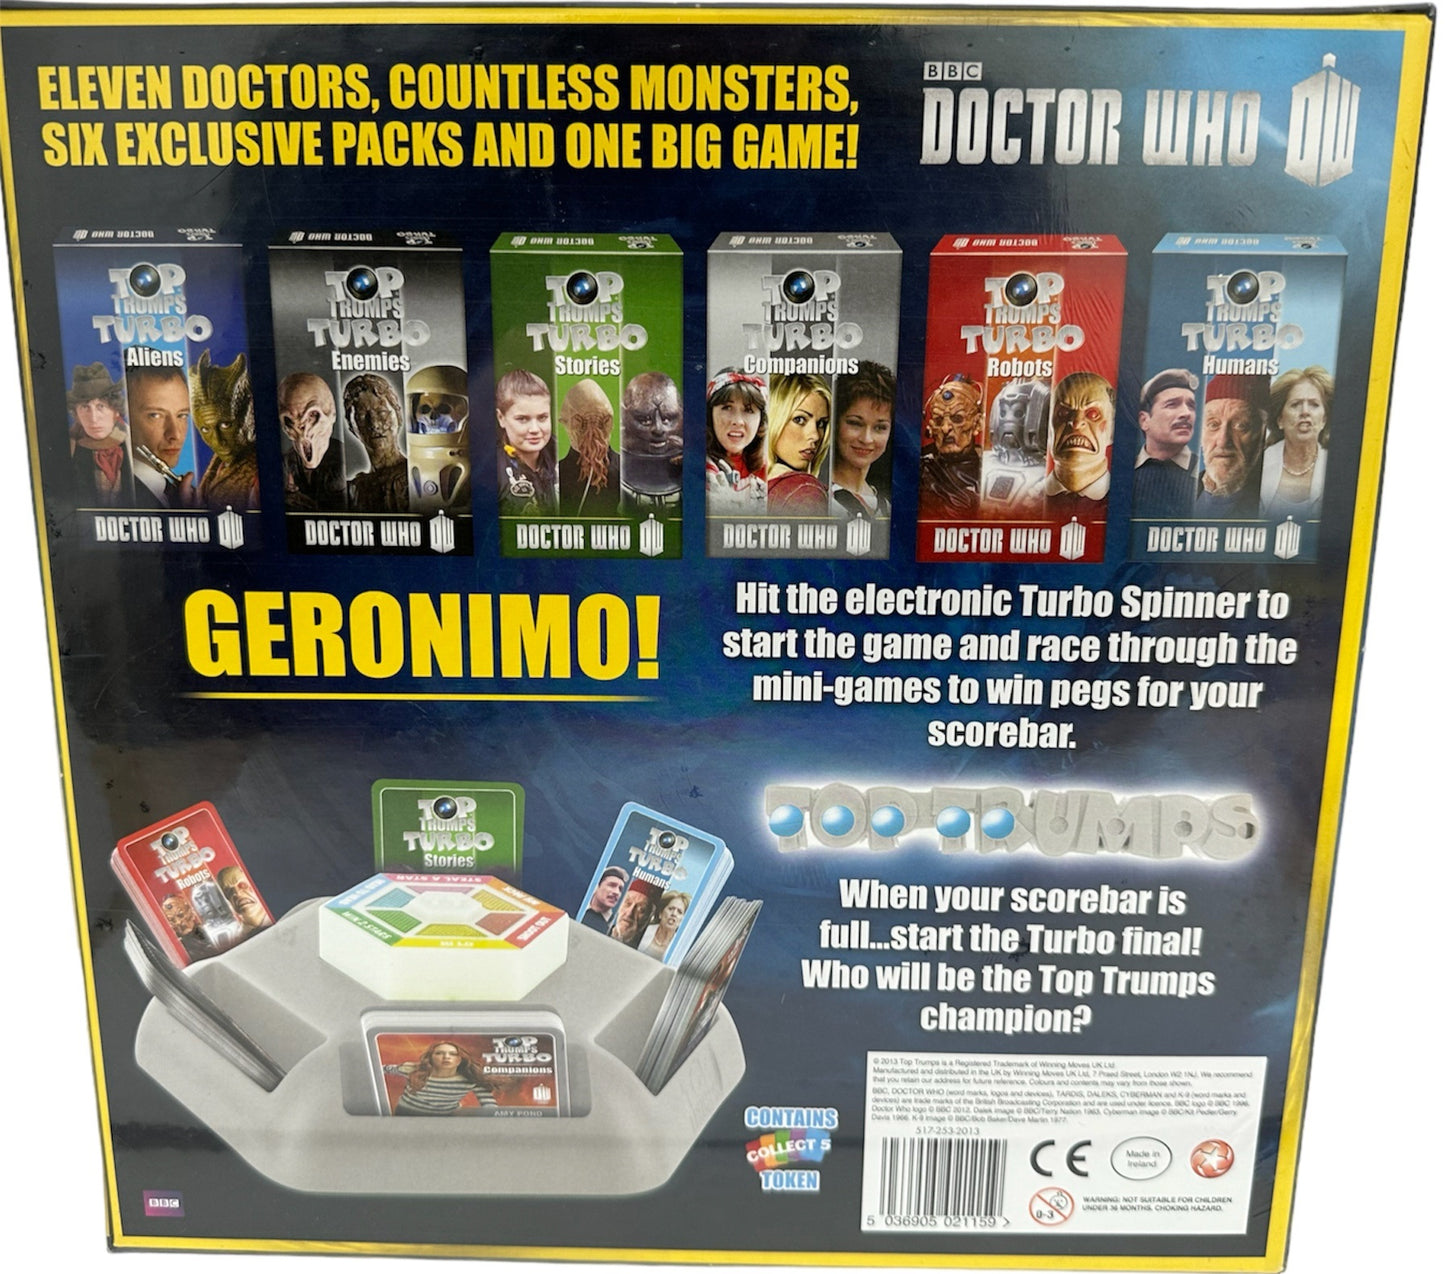 Vintage 2013 Doctor Dr Who Top Trump Turbo - Brand New Factory Sealed Shop Stock Room Find